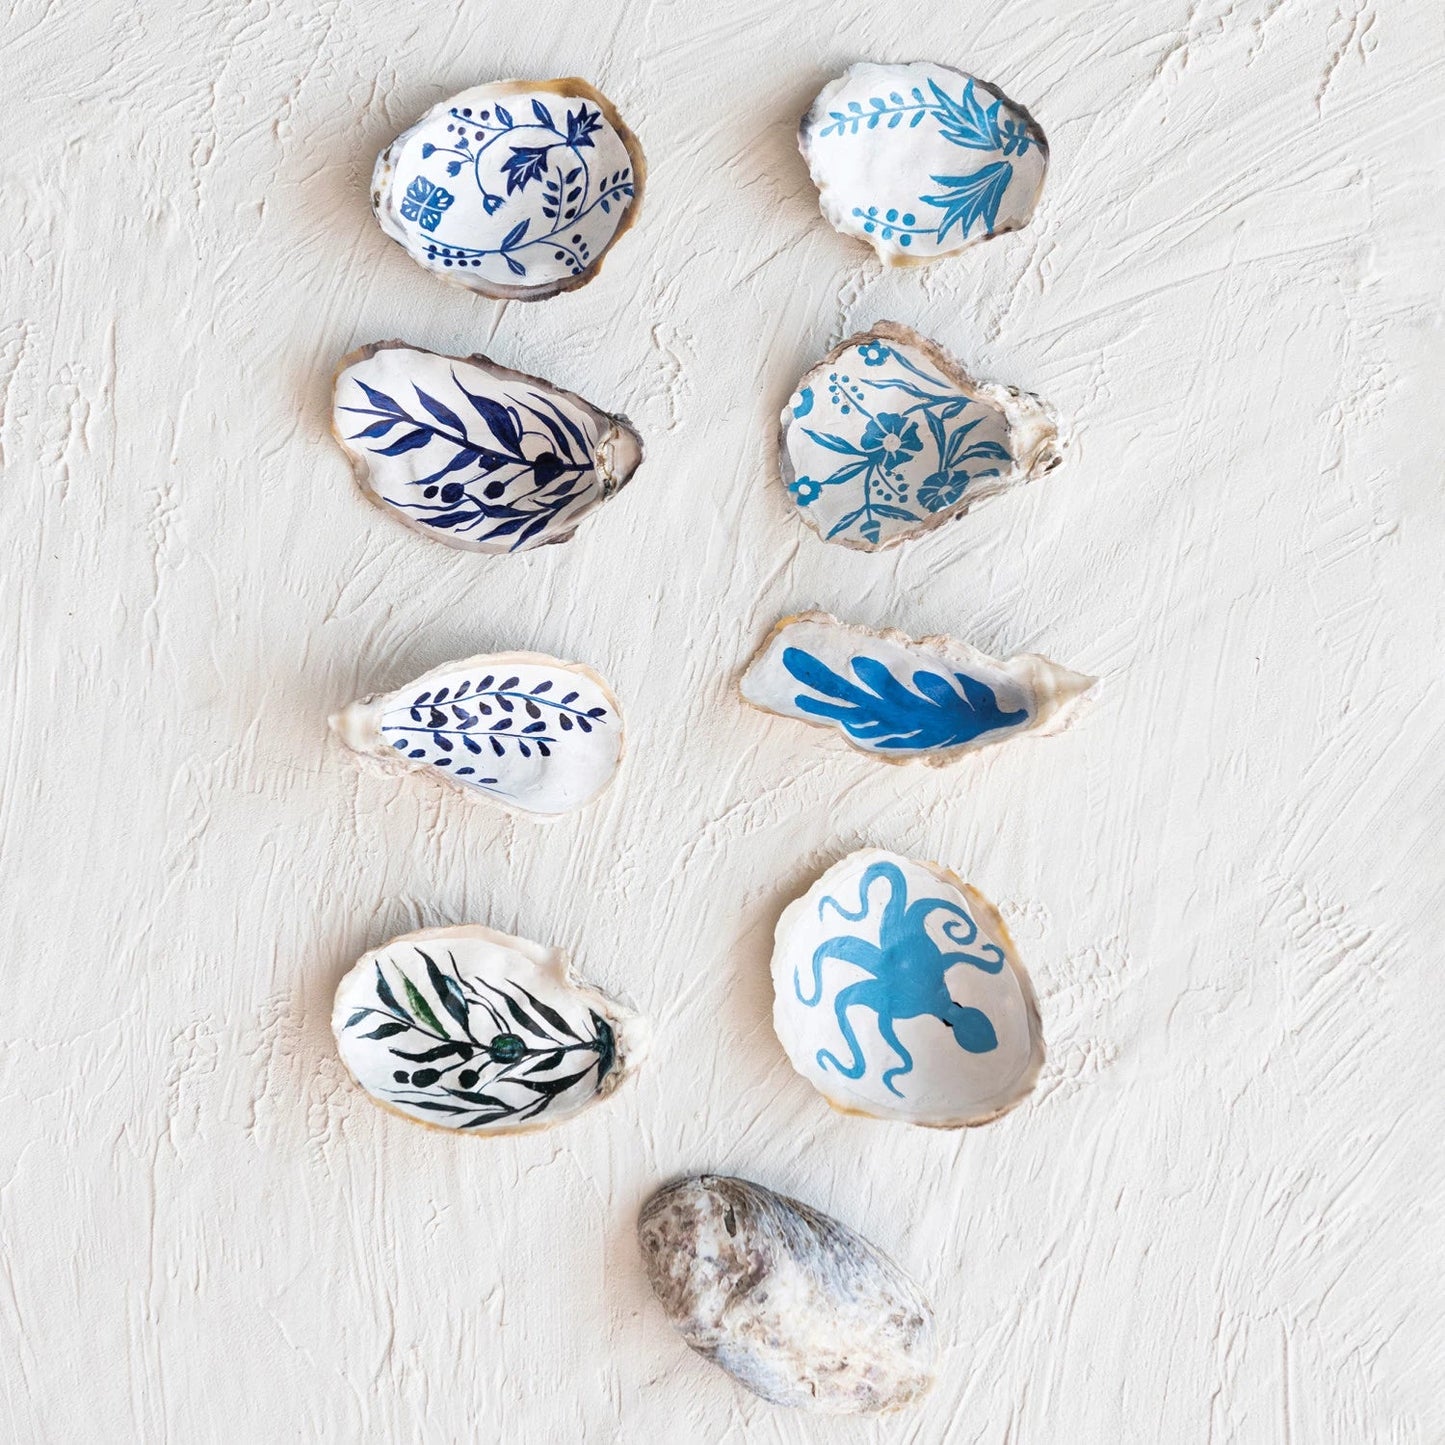 Hand-Painted Oyster Shell - The Riviera Towel Company